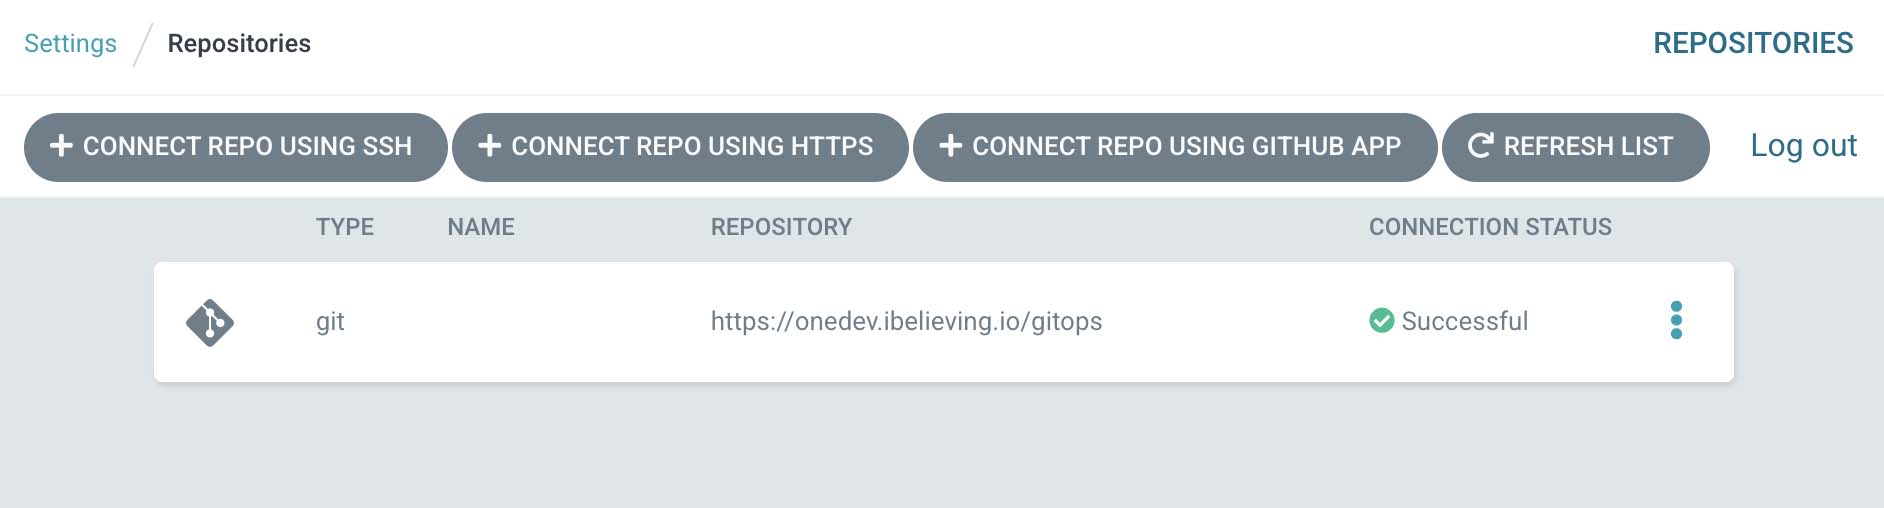 Connect Repo using HTTPS